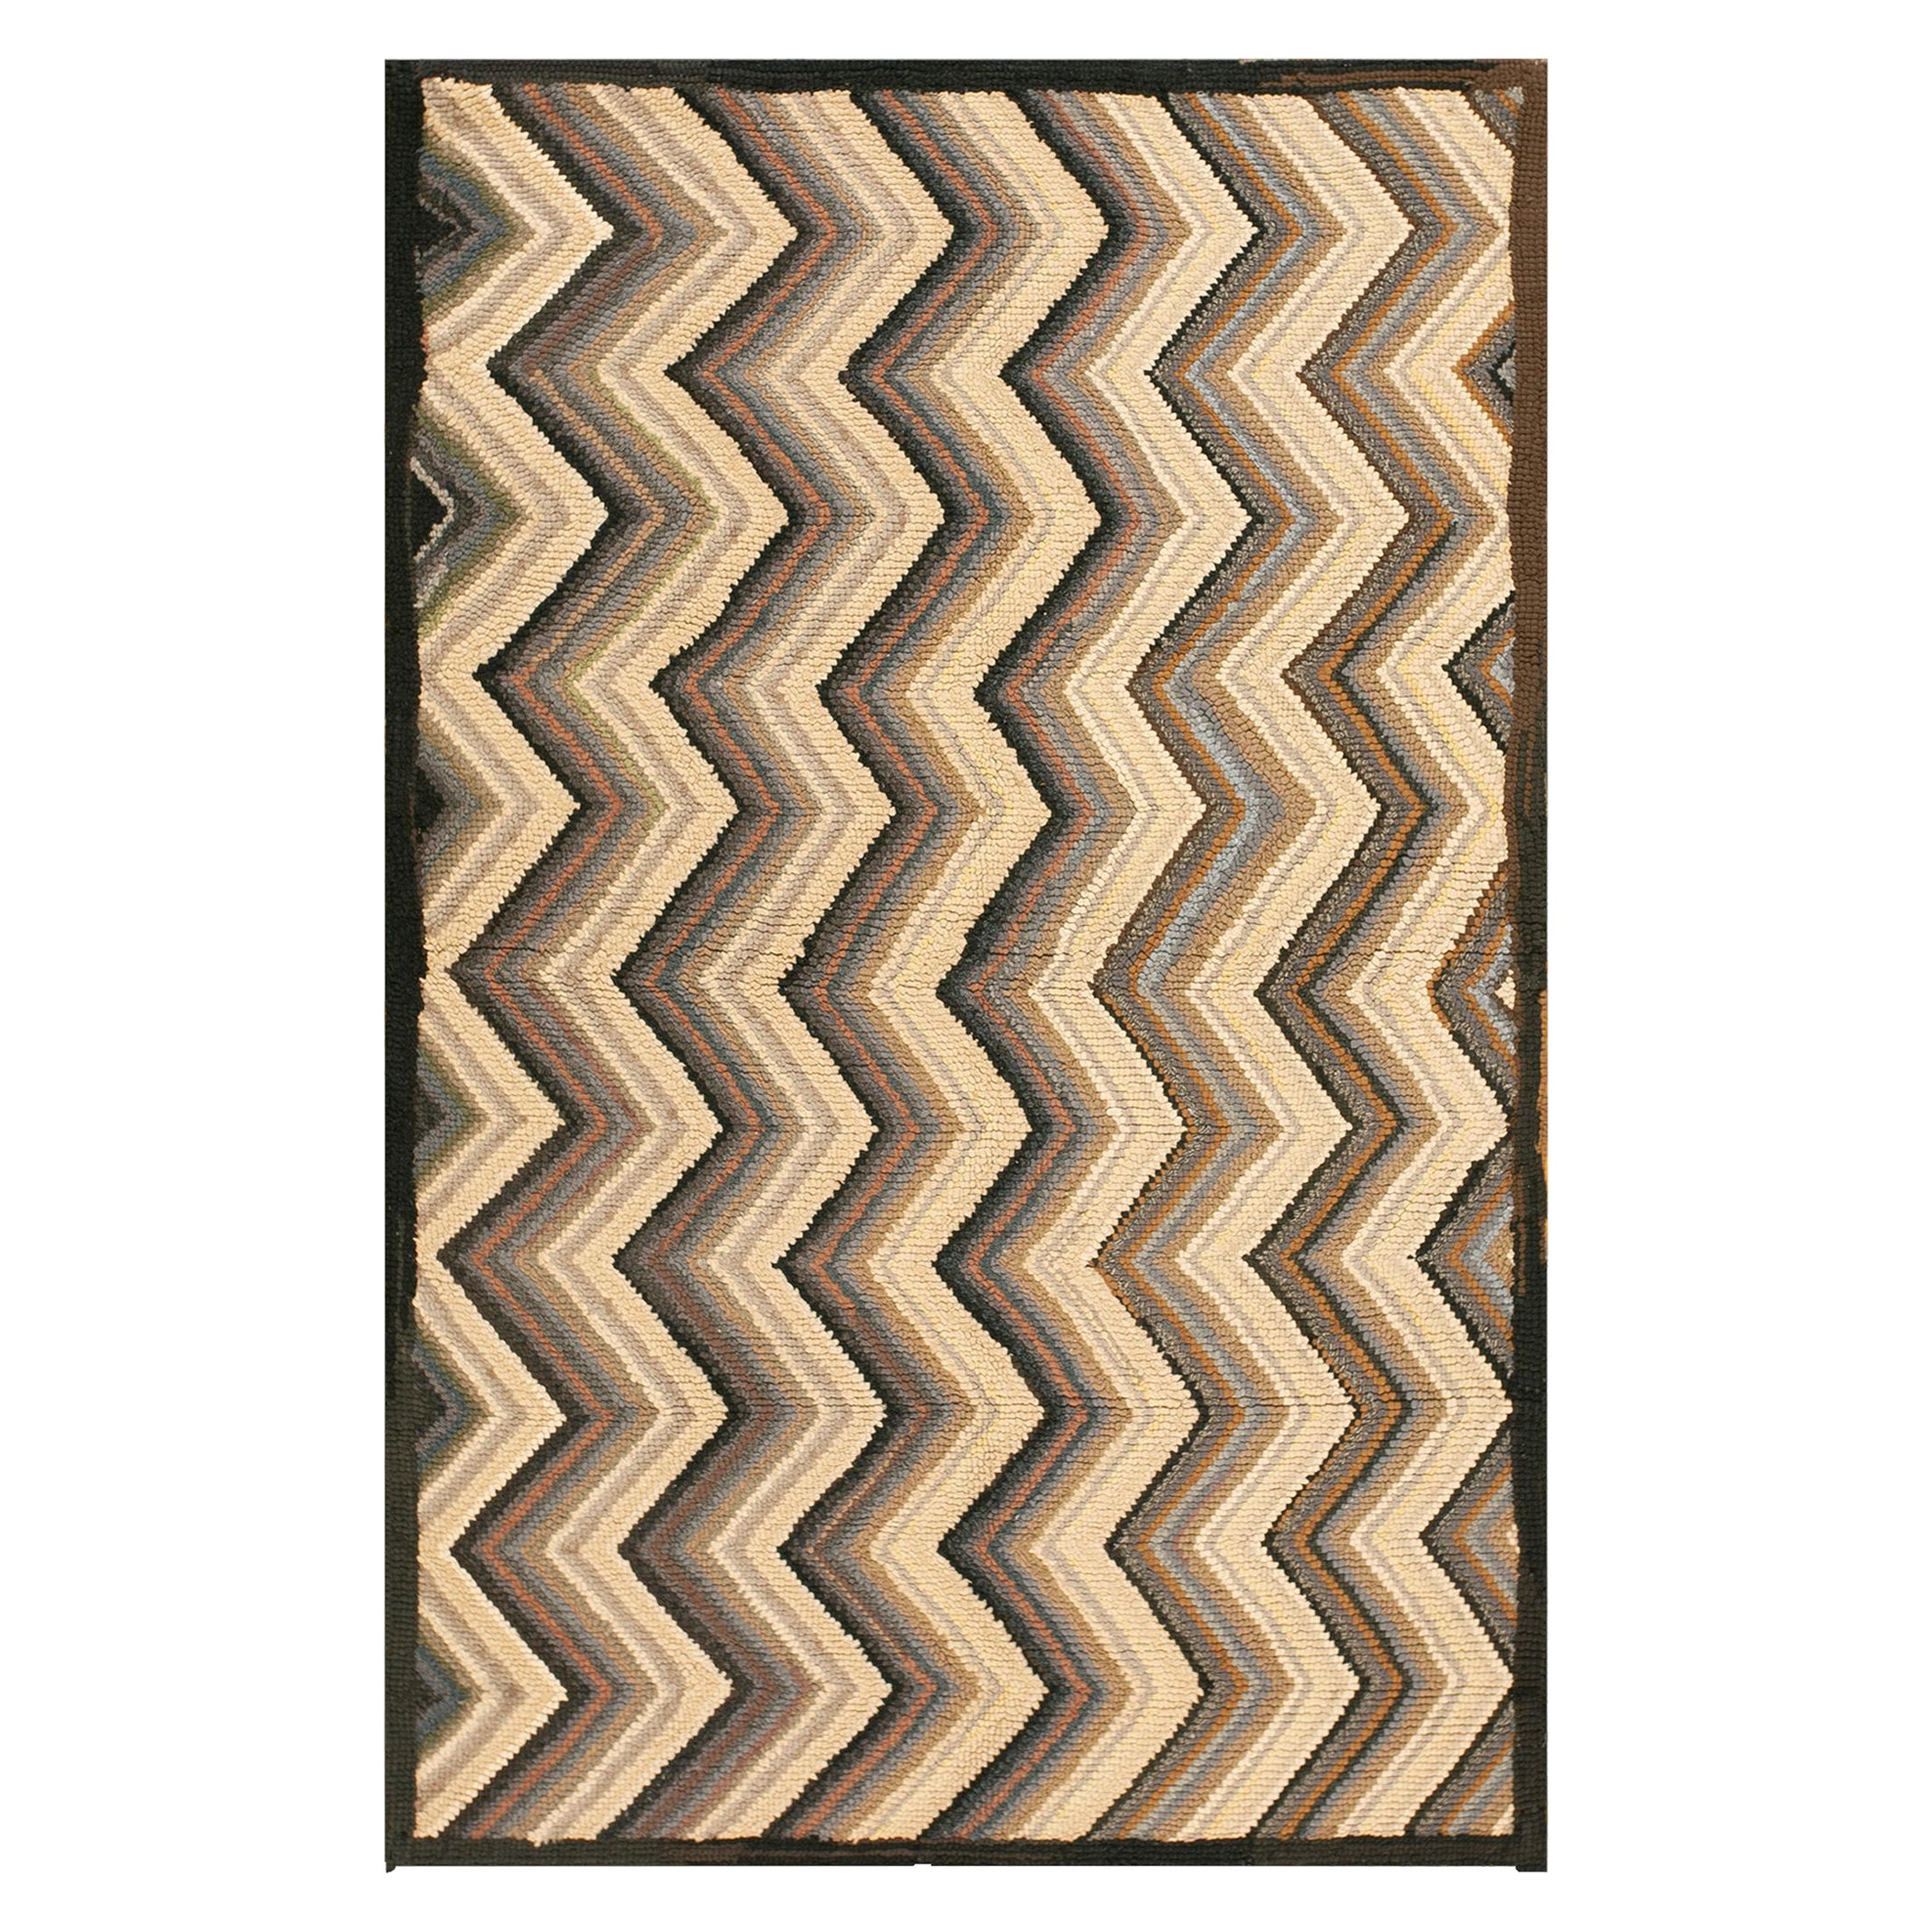 Mid 20th Century American Hooked Rug ( 4' x 6' - 122 x 183 ) 